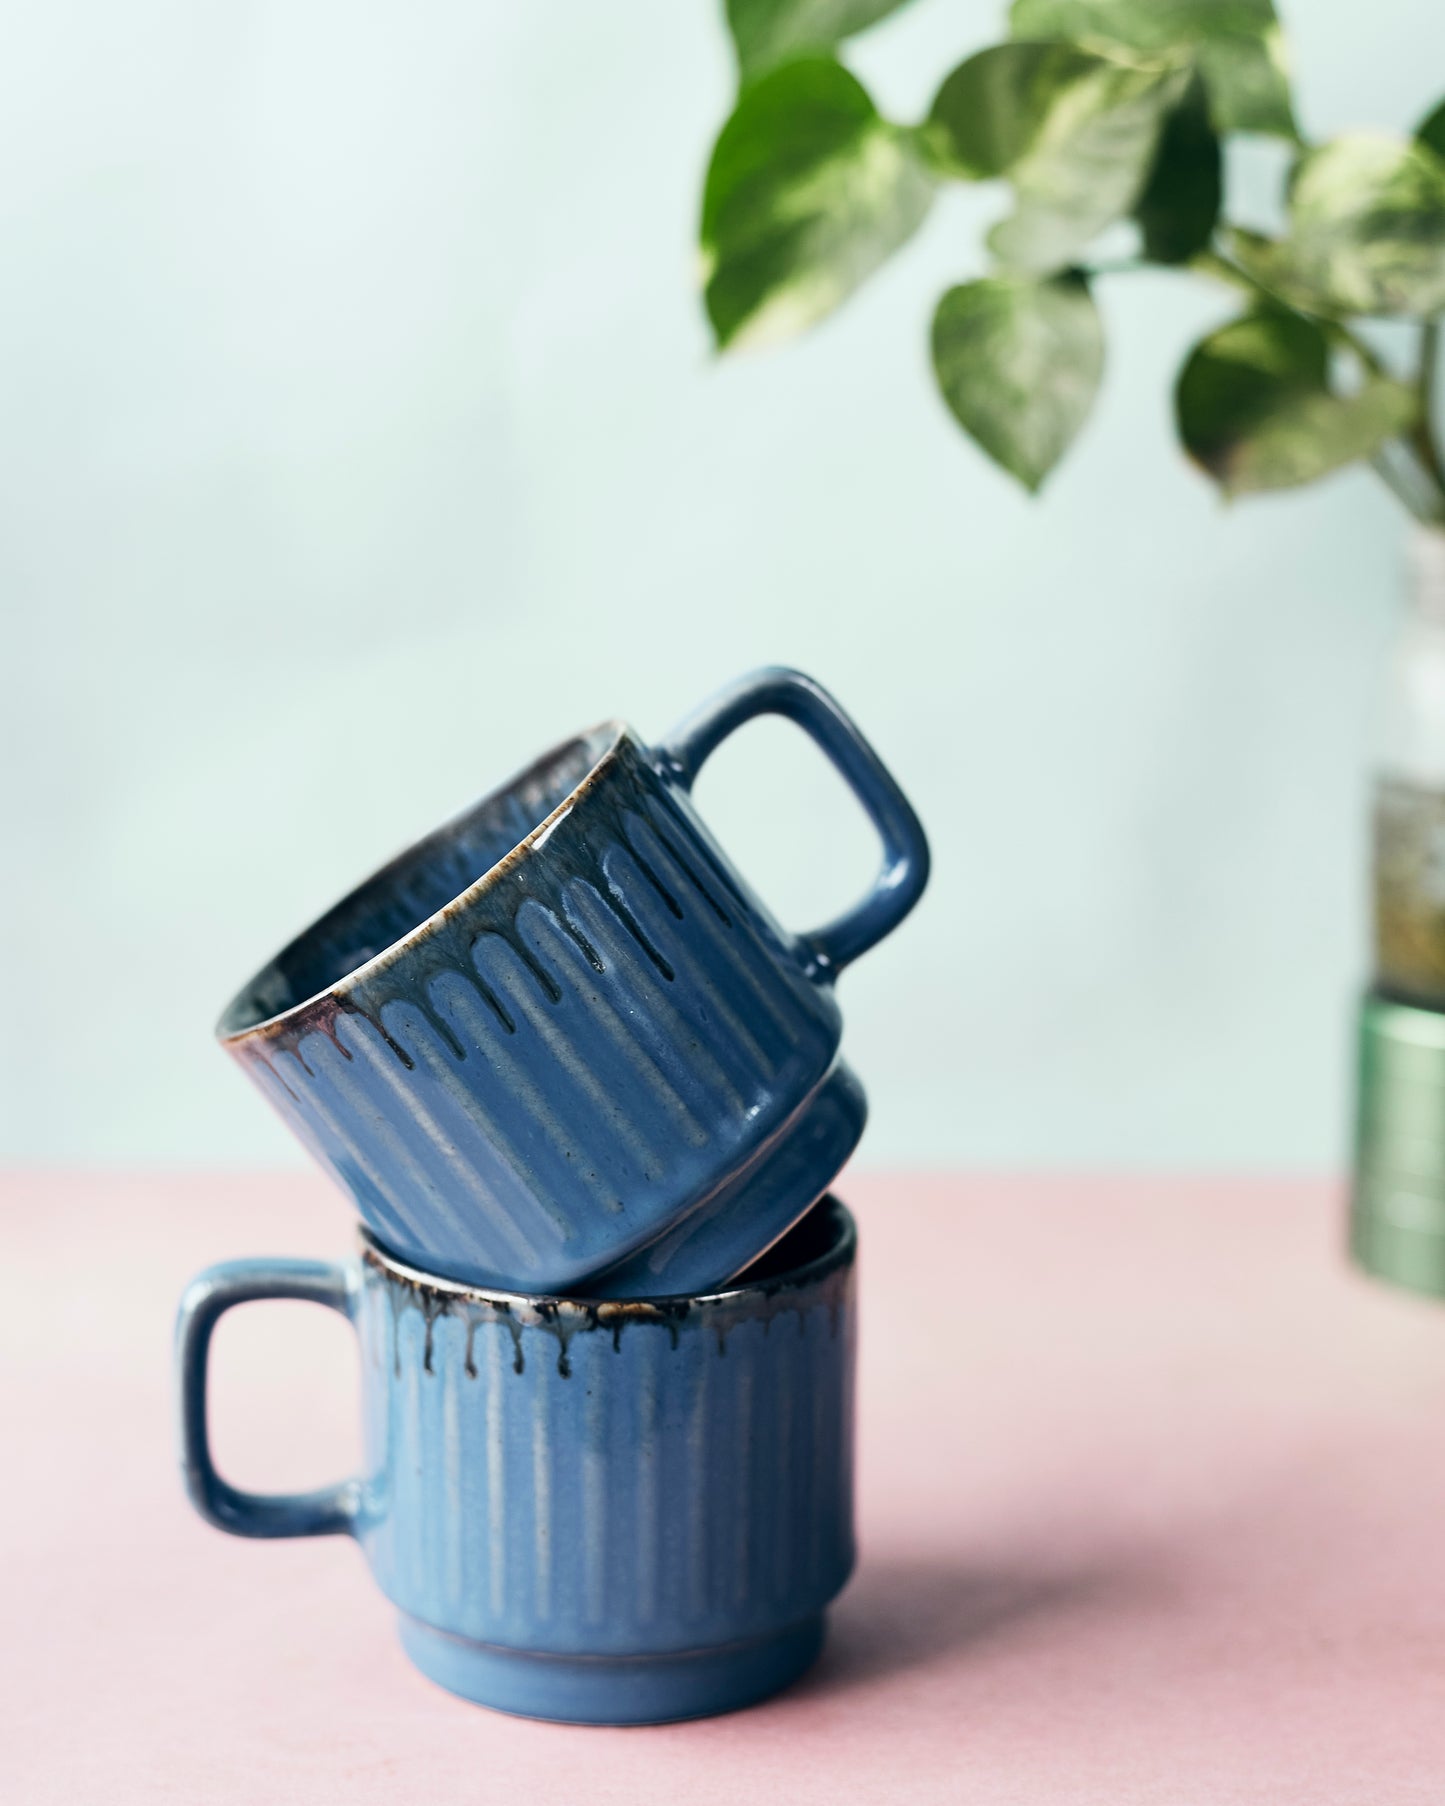 Powder Blue Perfection: Set of 2 Ceramic Coffee Cups